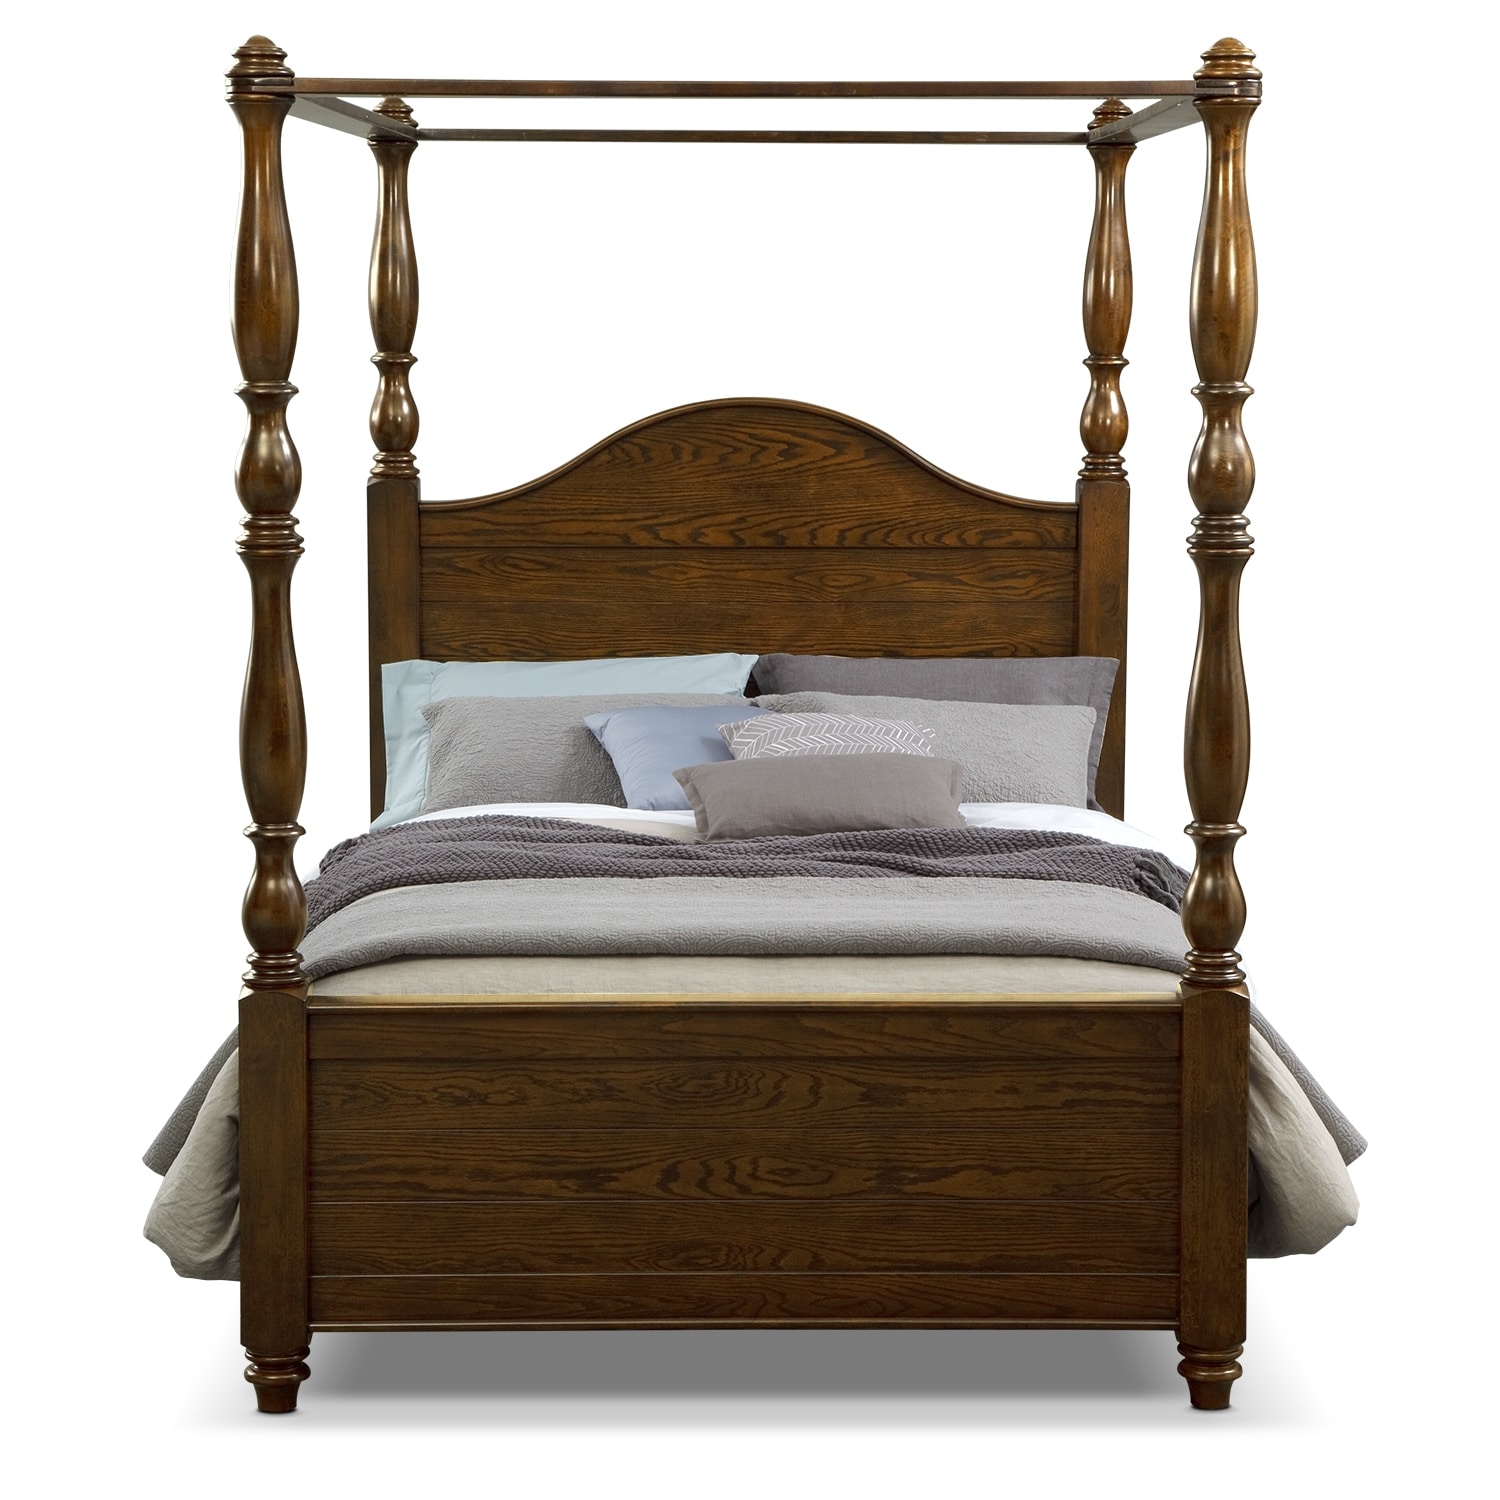 Carlyle Rustic Canopy King Bed by Pulaski